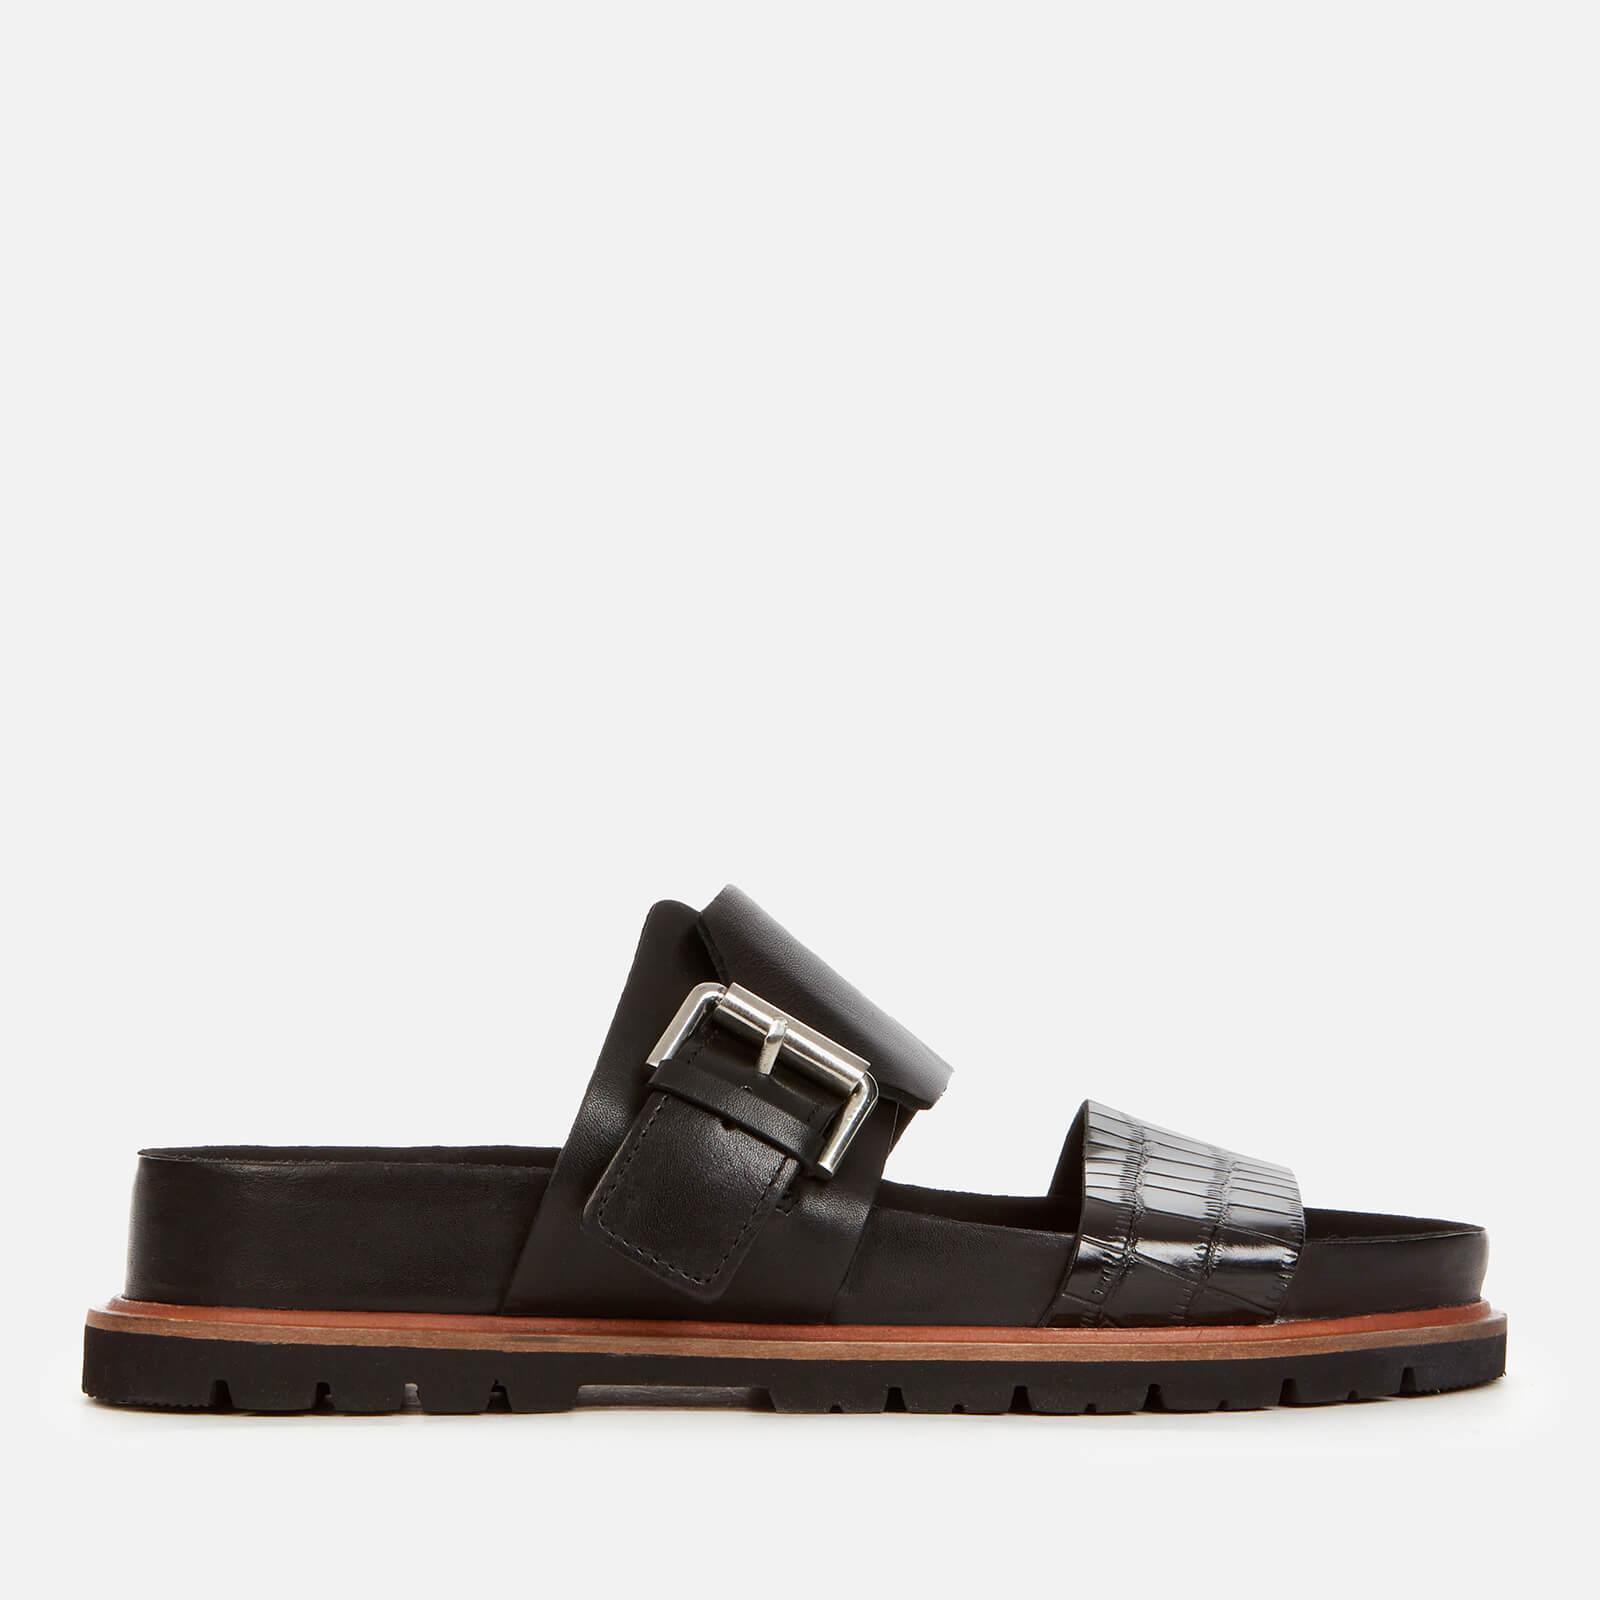 Clarks Orianna Sun Leather Double Strap Sandals in Black | Lyst UK